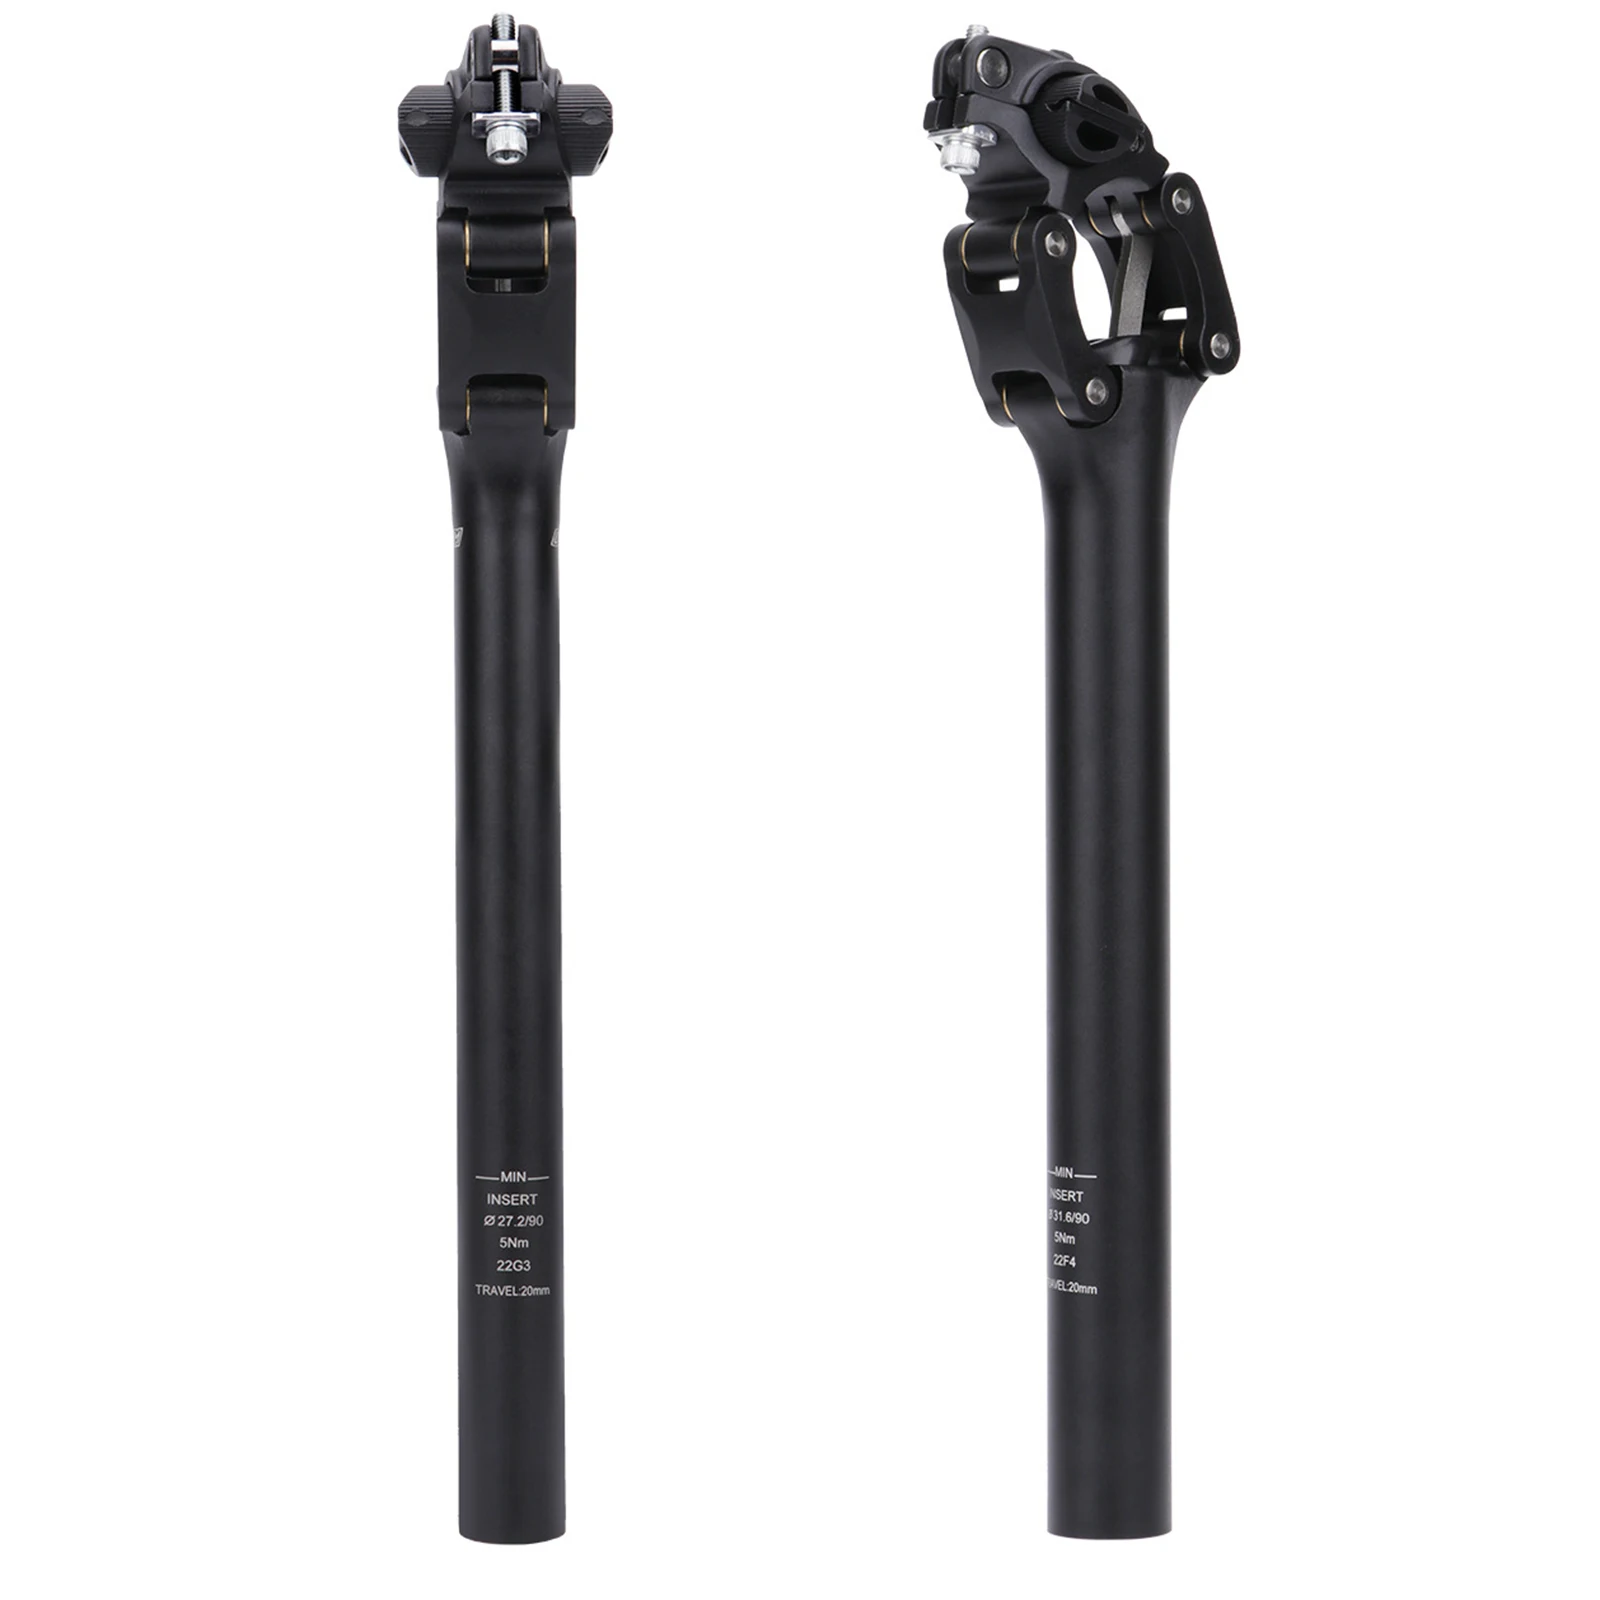 

DNM Suspension Mountain Bike Bicycle Seatpost Shock Absorber Post Shockstop 27.2mm 30.9mm 31.6mm Riding Seat Post Bike Parts